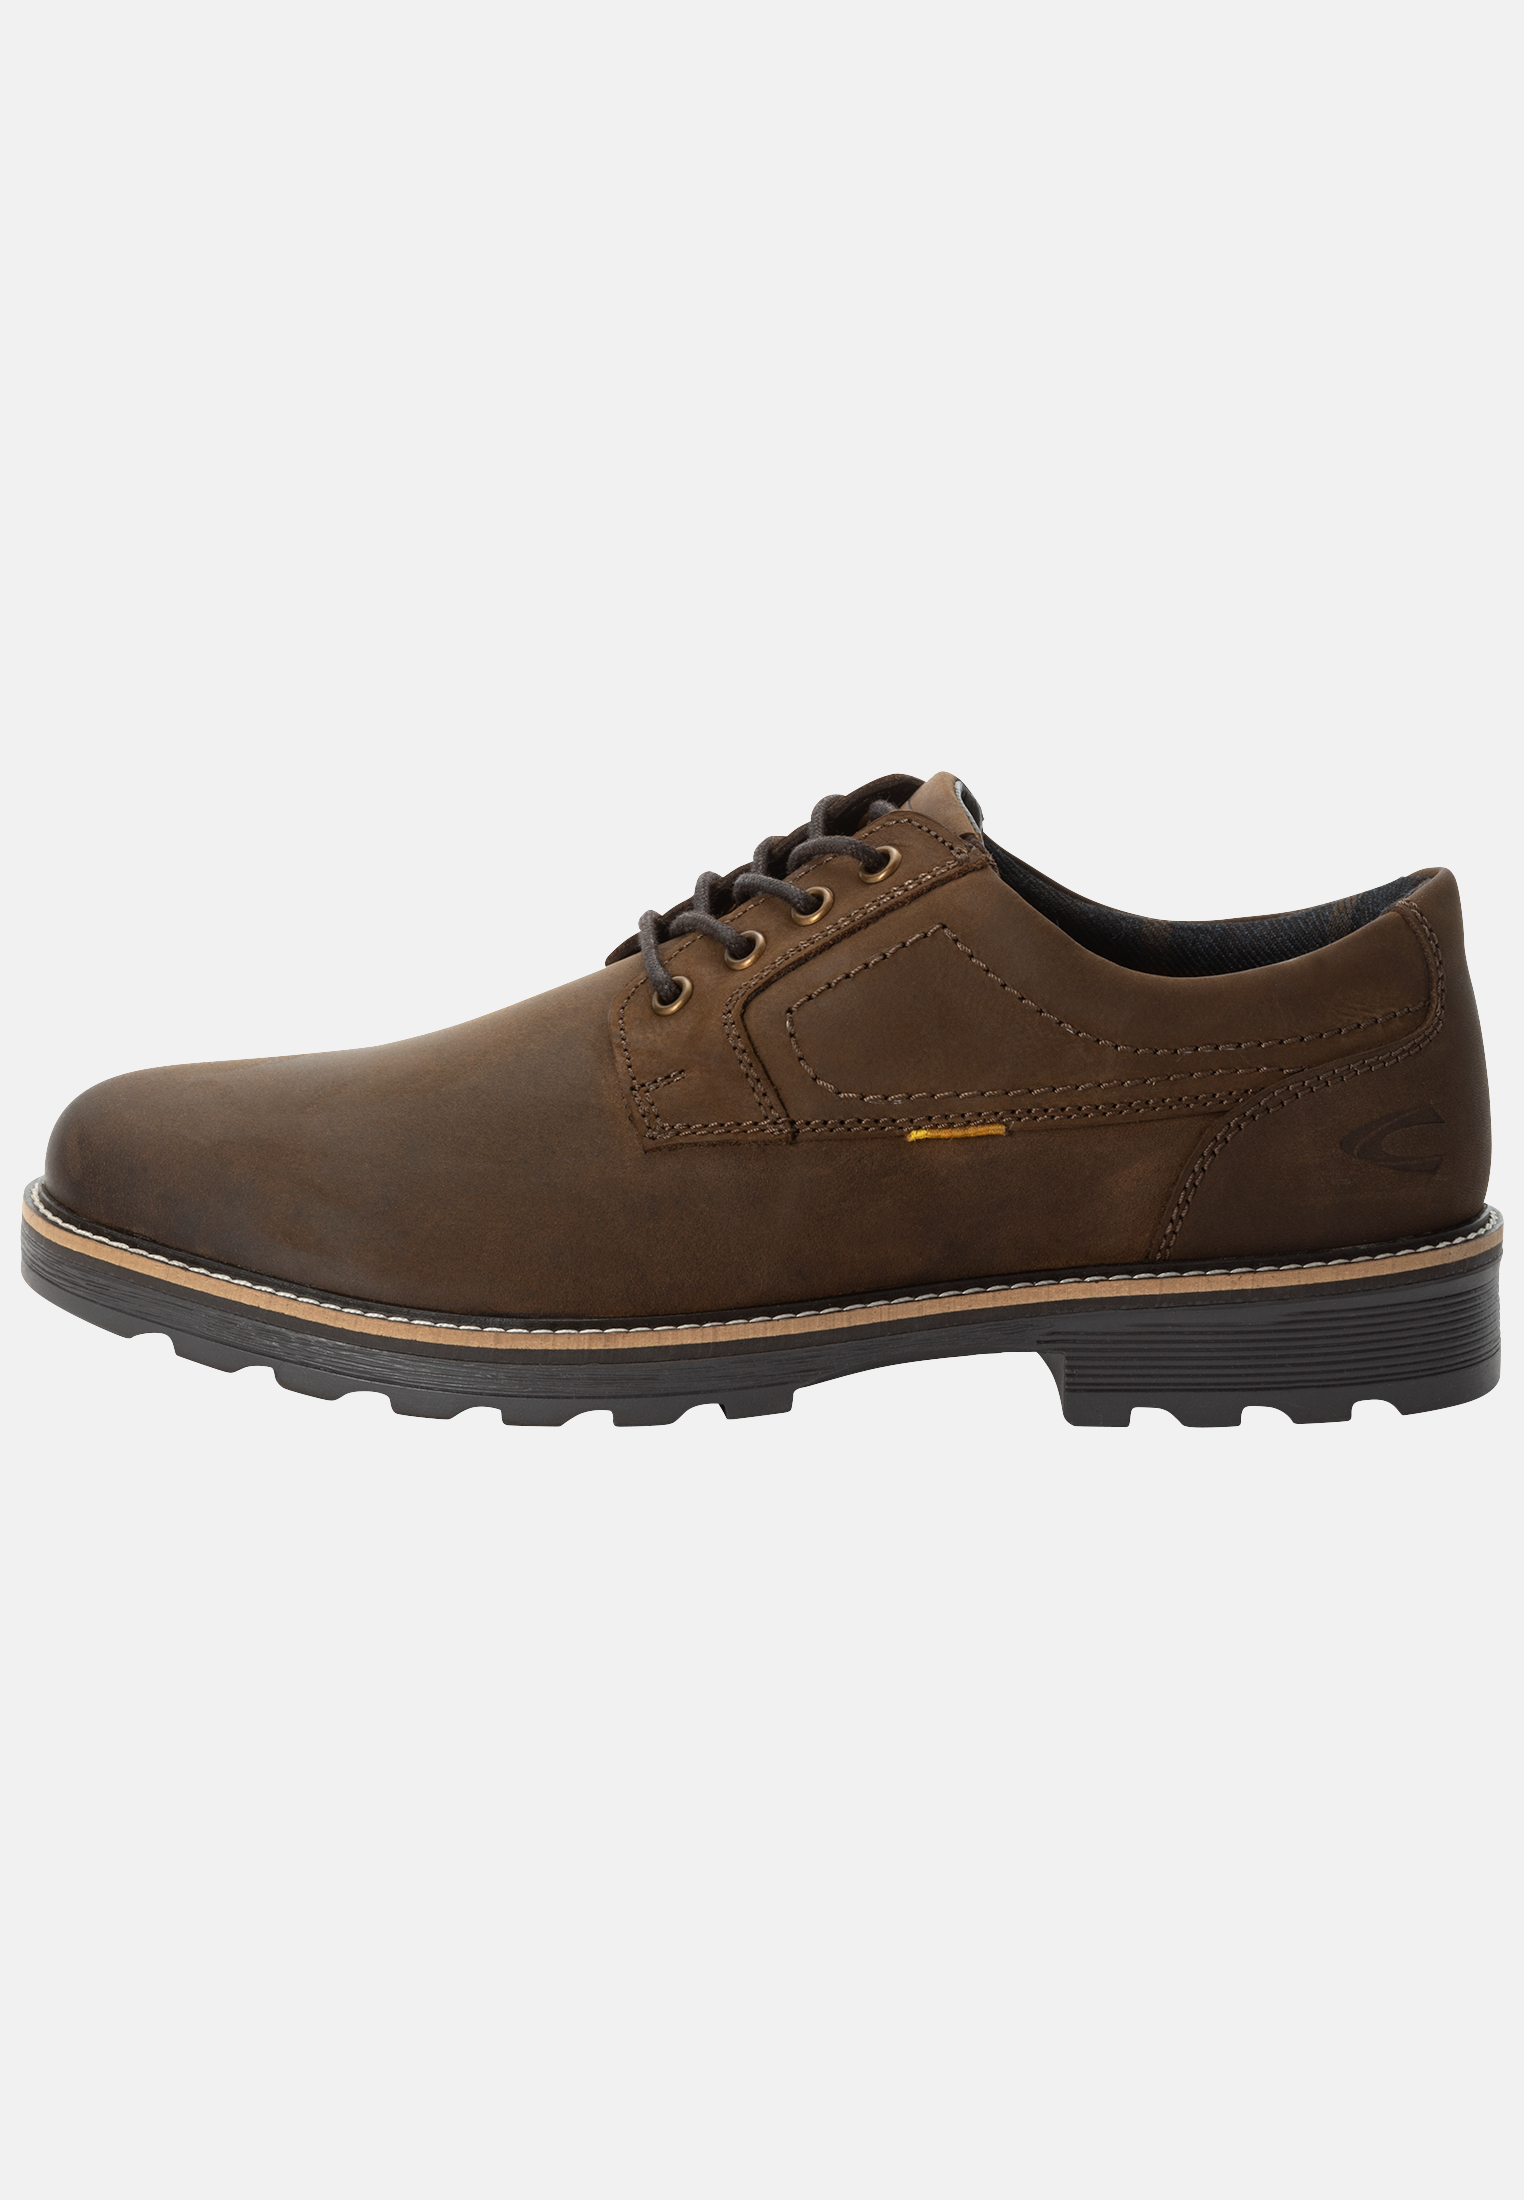 Camel Active Lace-up shoes made of nubuck leather